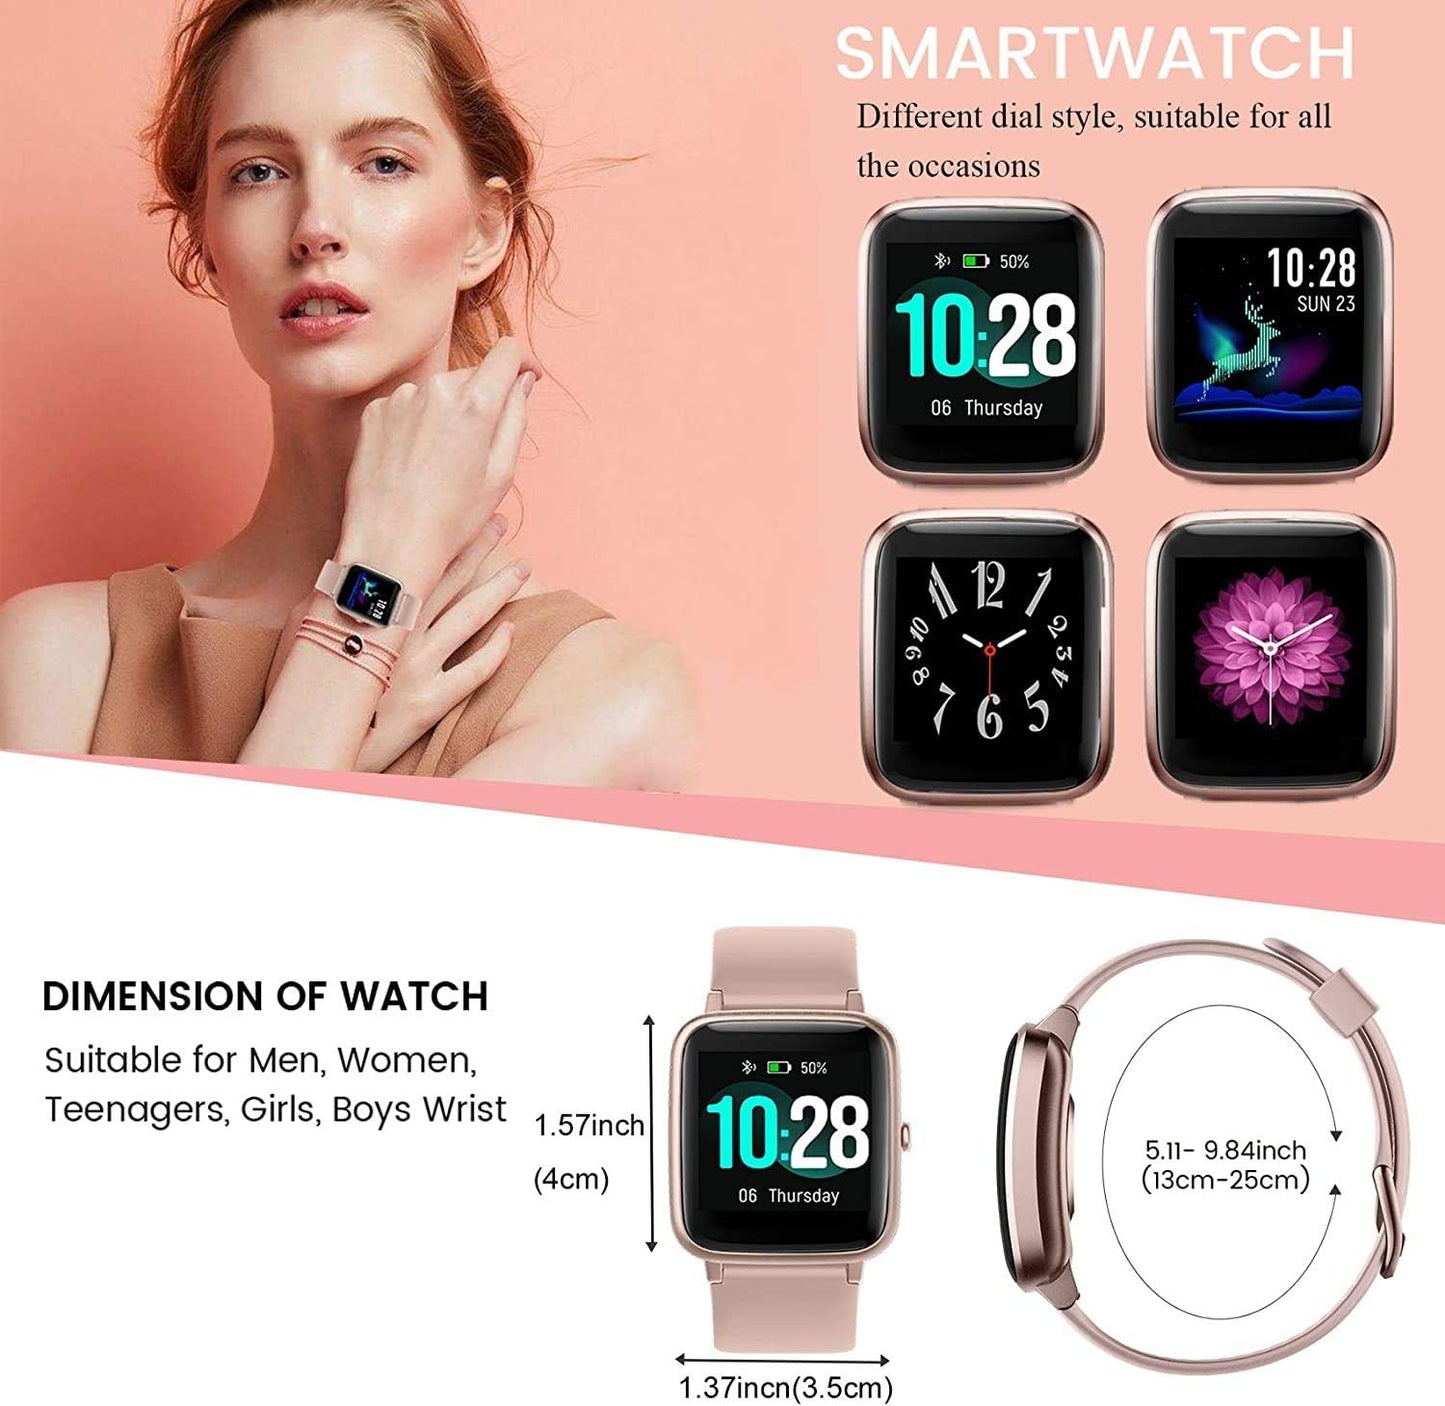 Fitness Tracker Smart Watch for Android Phones and Ios Phones Step Tracker Heart Rate Monitor, IP68 Waterproof Fitness Watch Sleep Monitoring, Calorie Counter, Pedometer Smartwatch for Women